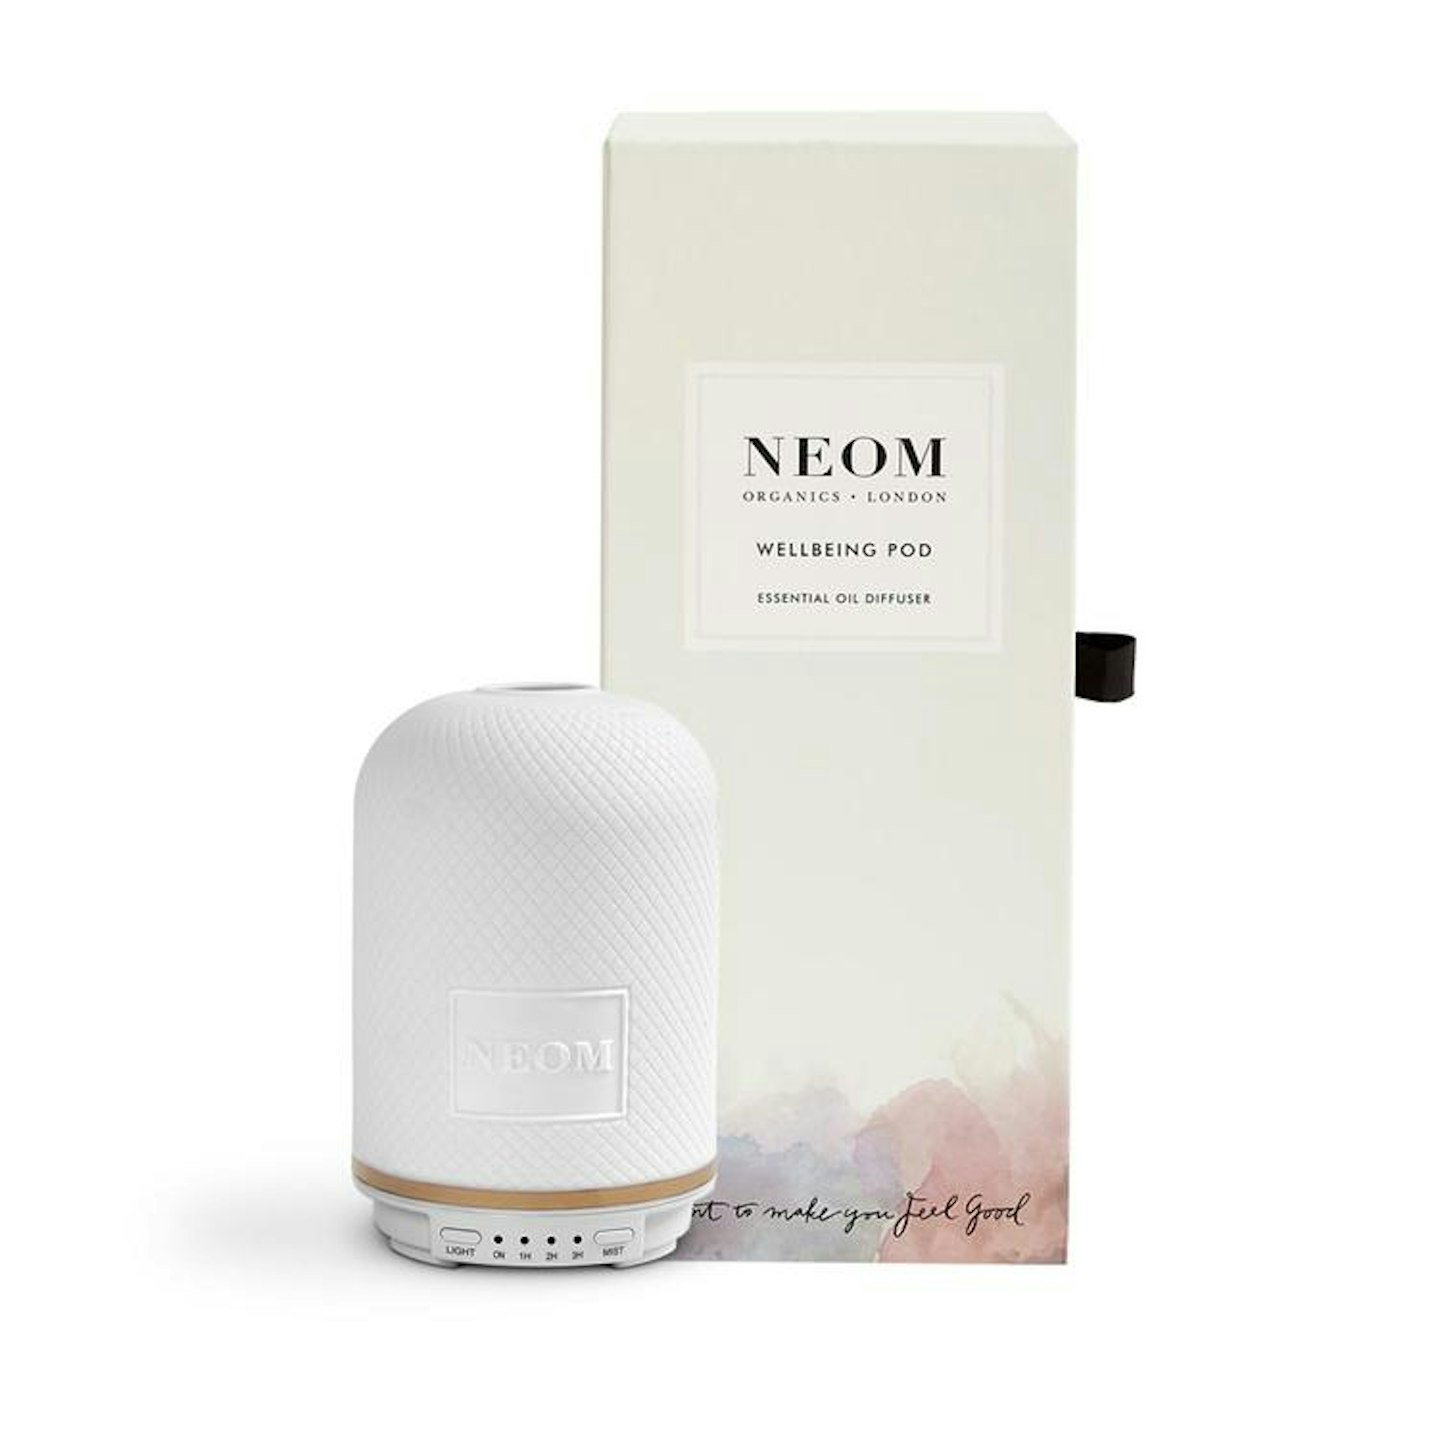 Neom, Wellbeing Pod Essential Oil Diffuser, £90